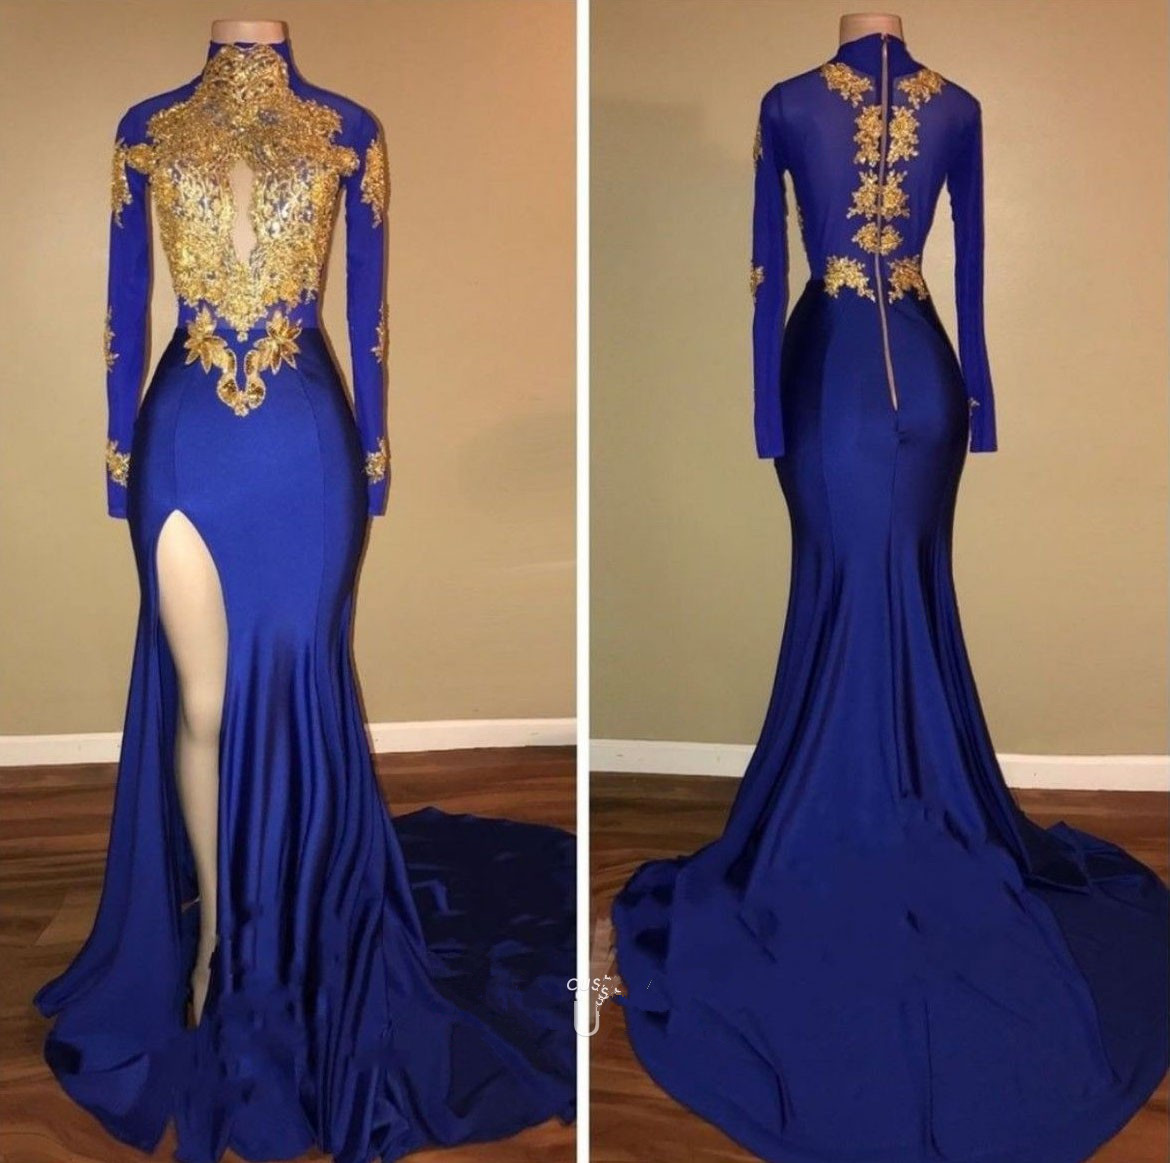 Long Sleeves Royal Blue Prom Dress With Gold Appliqued Lace